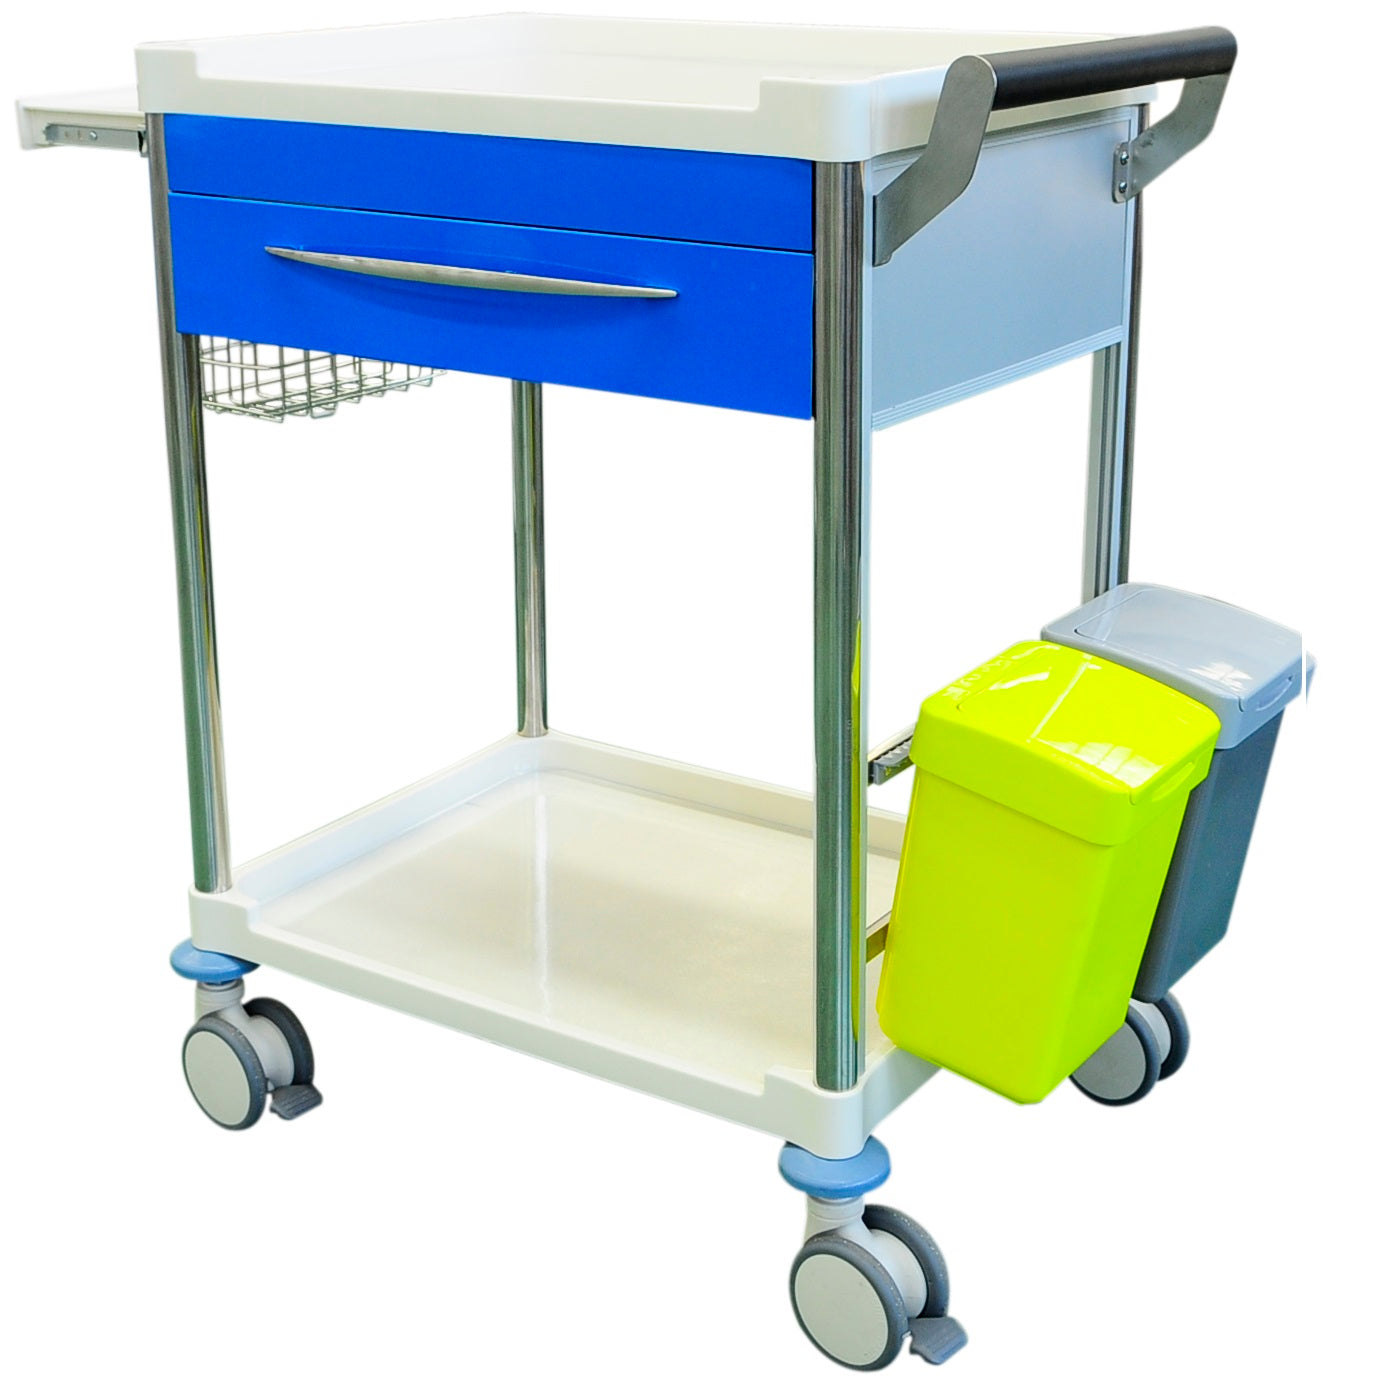 This single drawer treatment trolley comes with all accessories as standard to ensure you have everything you need out of the box.